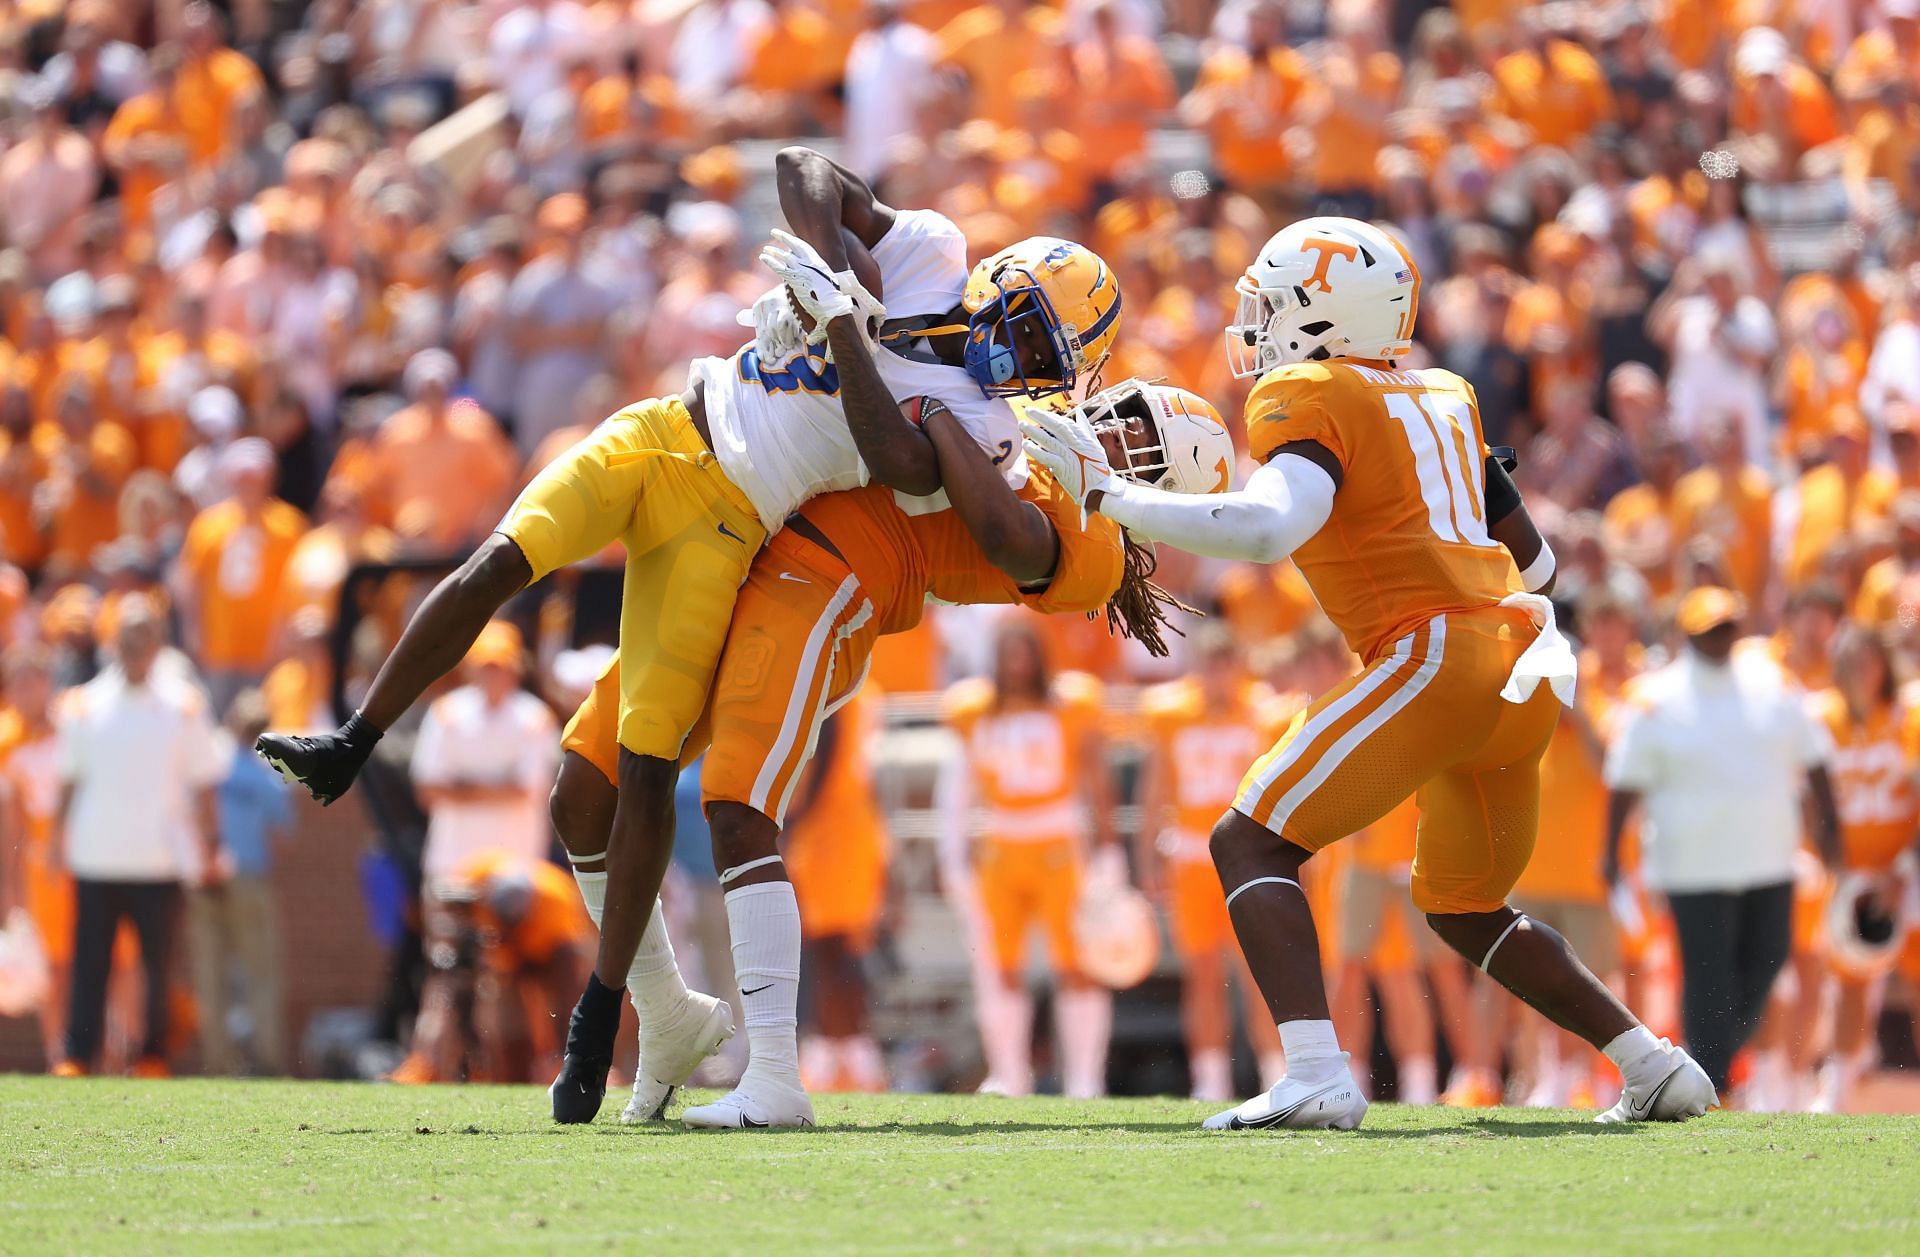 Jordan Addison #3 of the Pittsburg Panthers is tackled by Jeremy Banks #33 of the Tennessee Volunteers